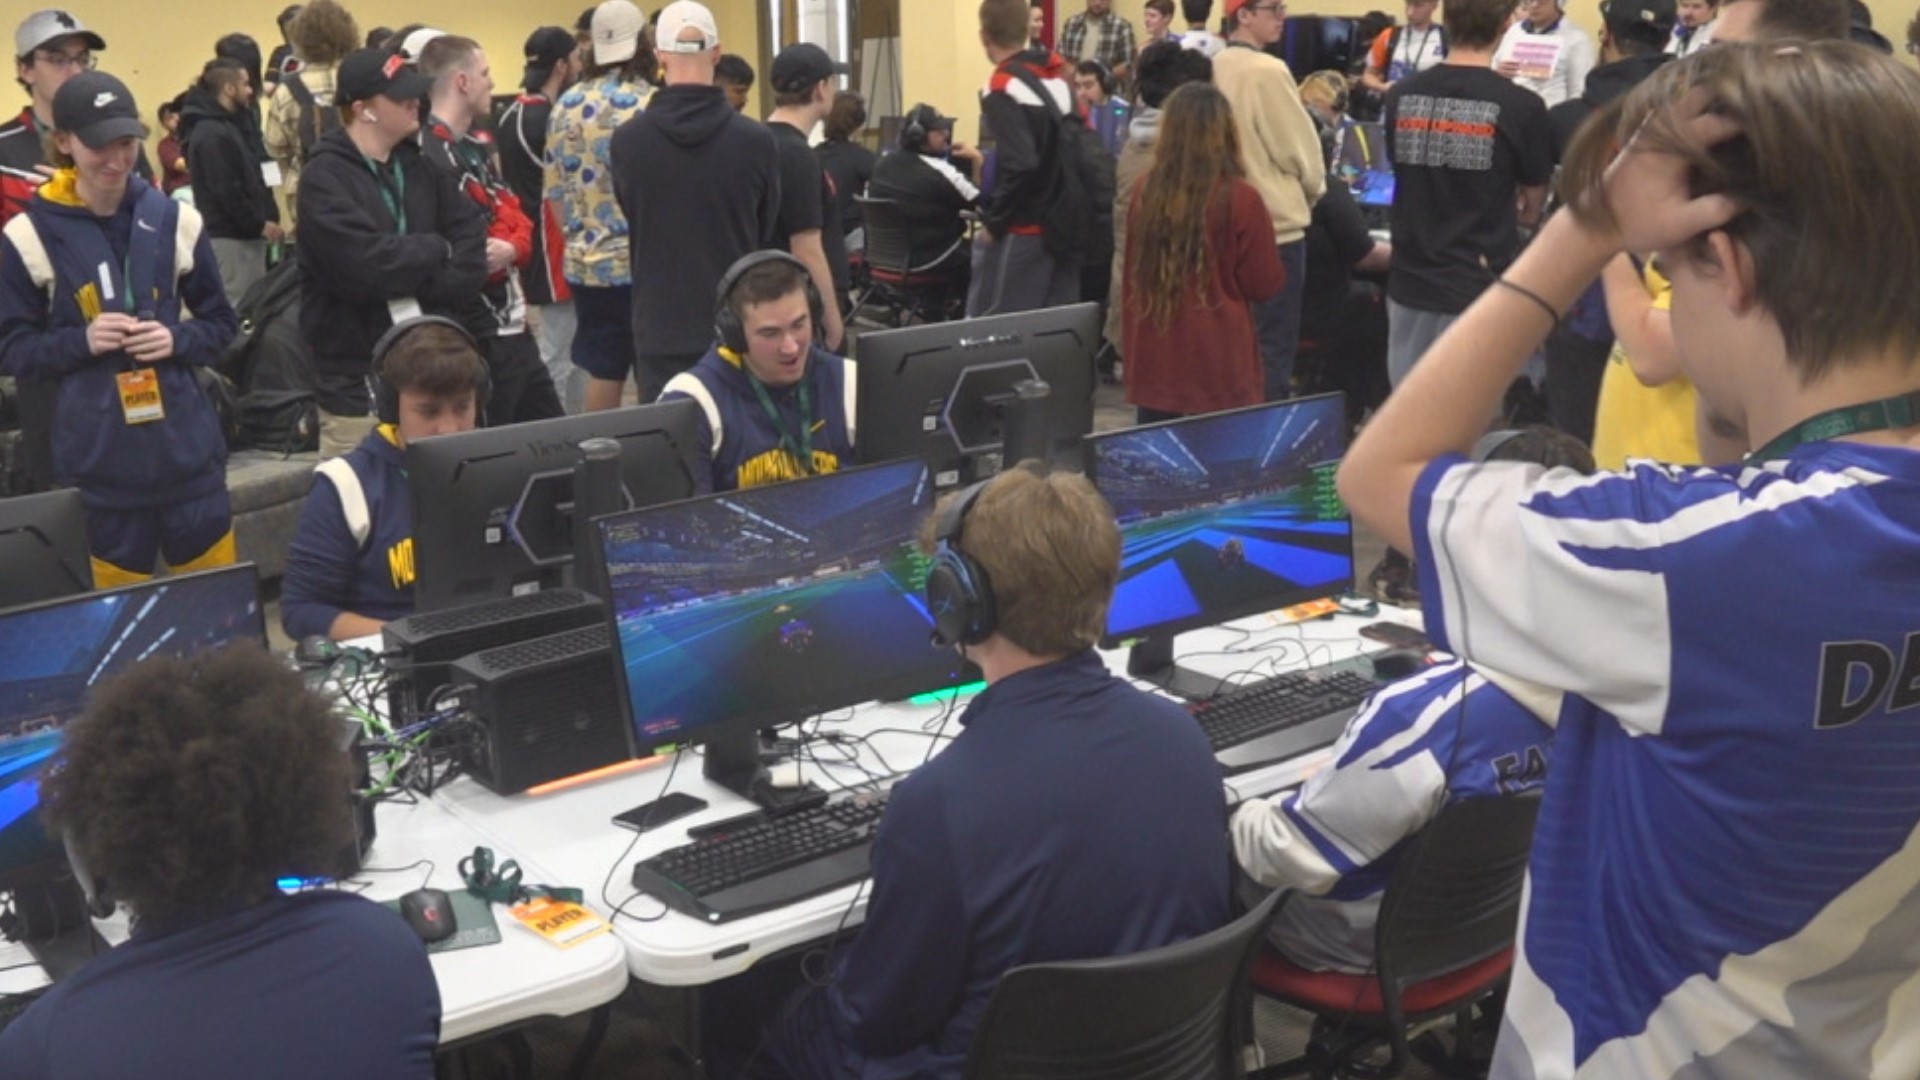 Best of the best in the gaming world travel to Harrisburg for the biggest collegiate Esports event in the country